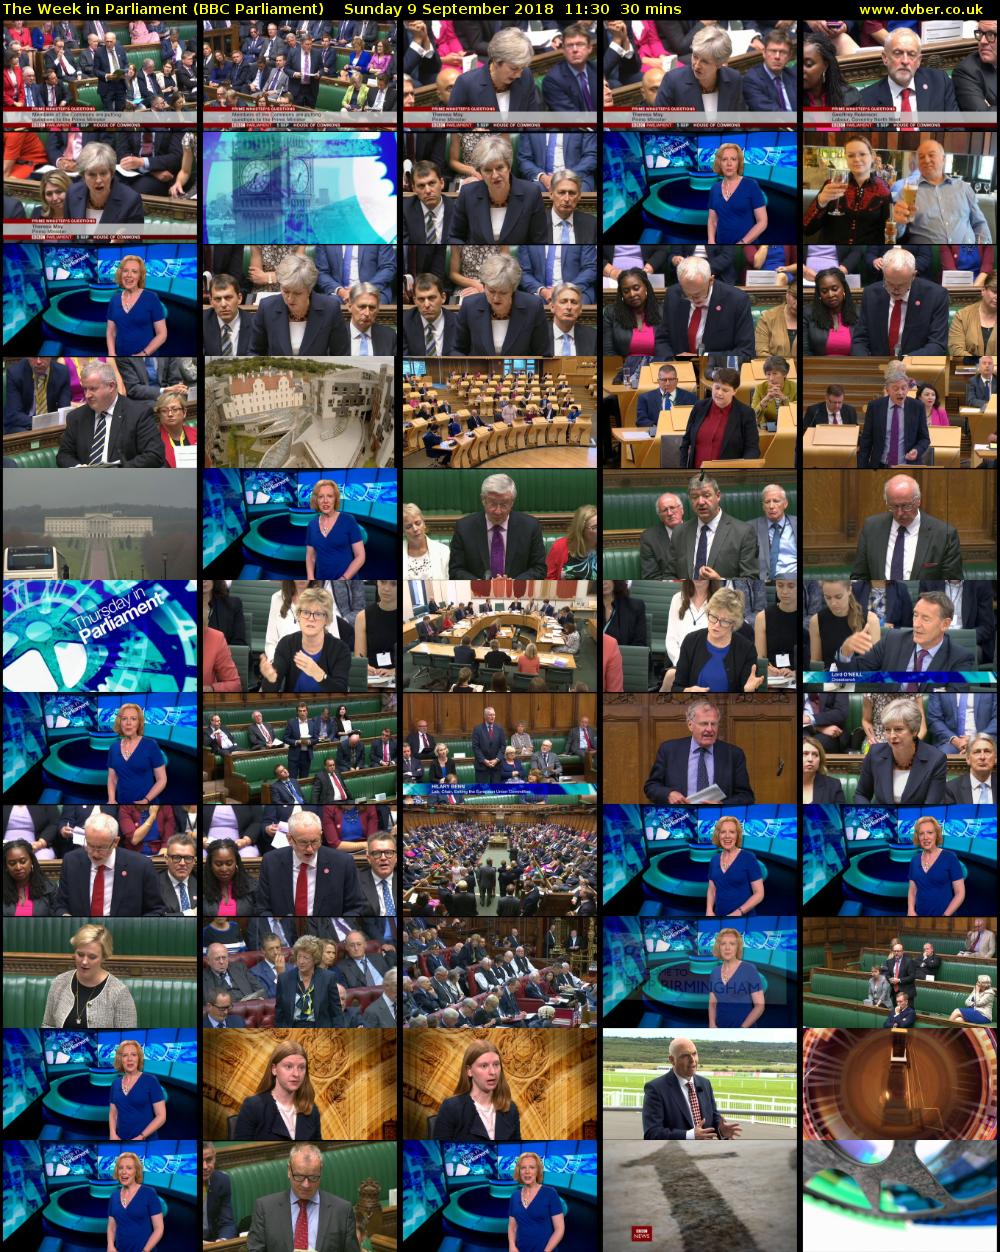 The Week in Parliament (BBC Parliament) Sunday 9 September 2018 11:30 - 12:00